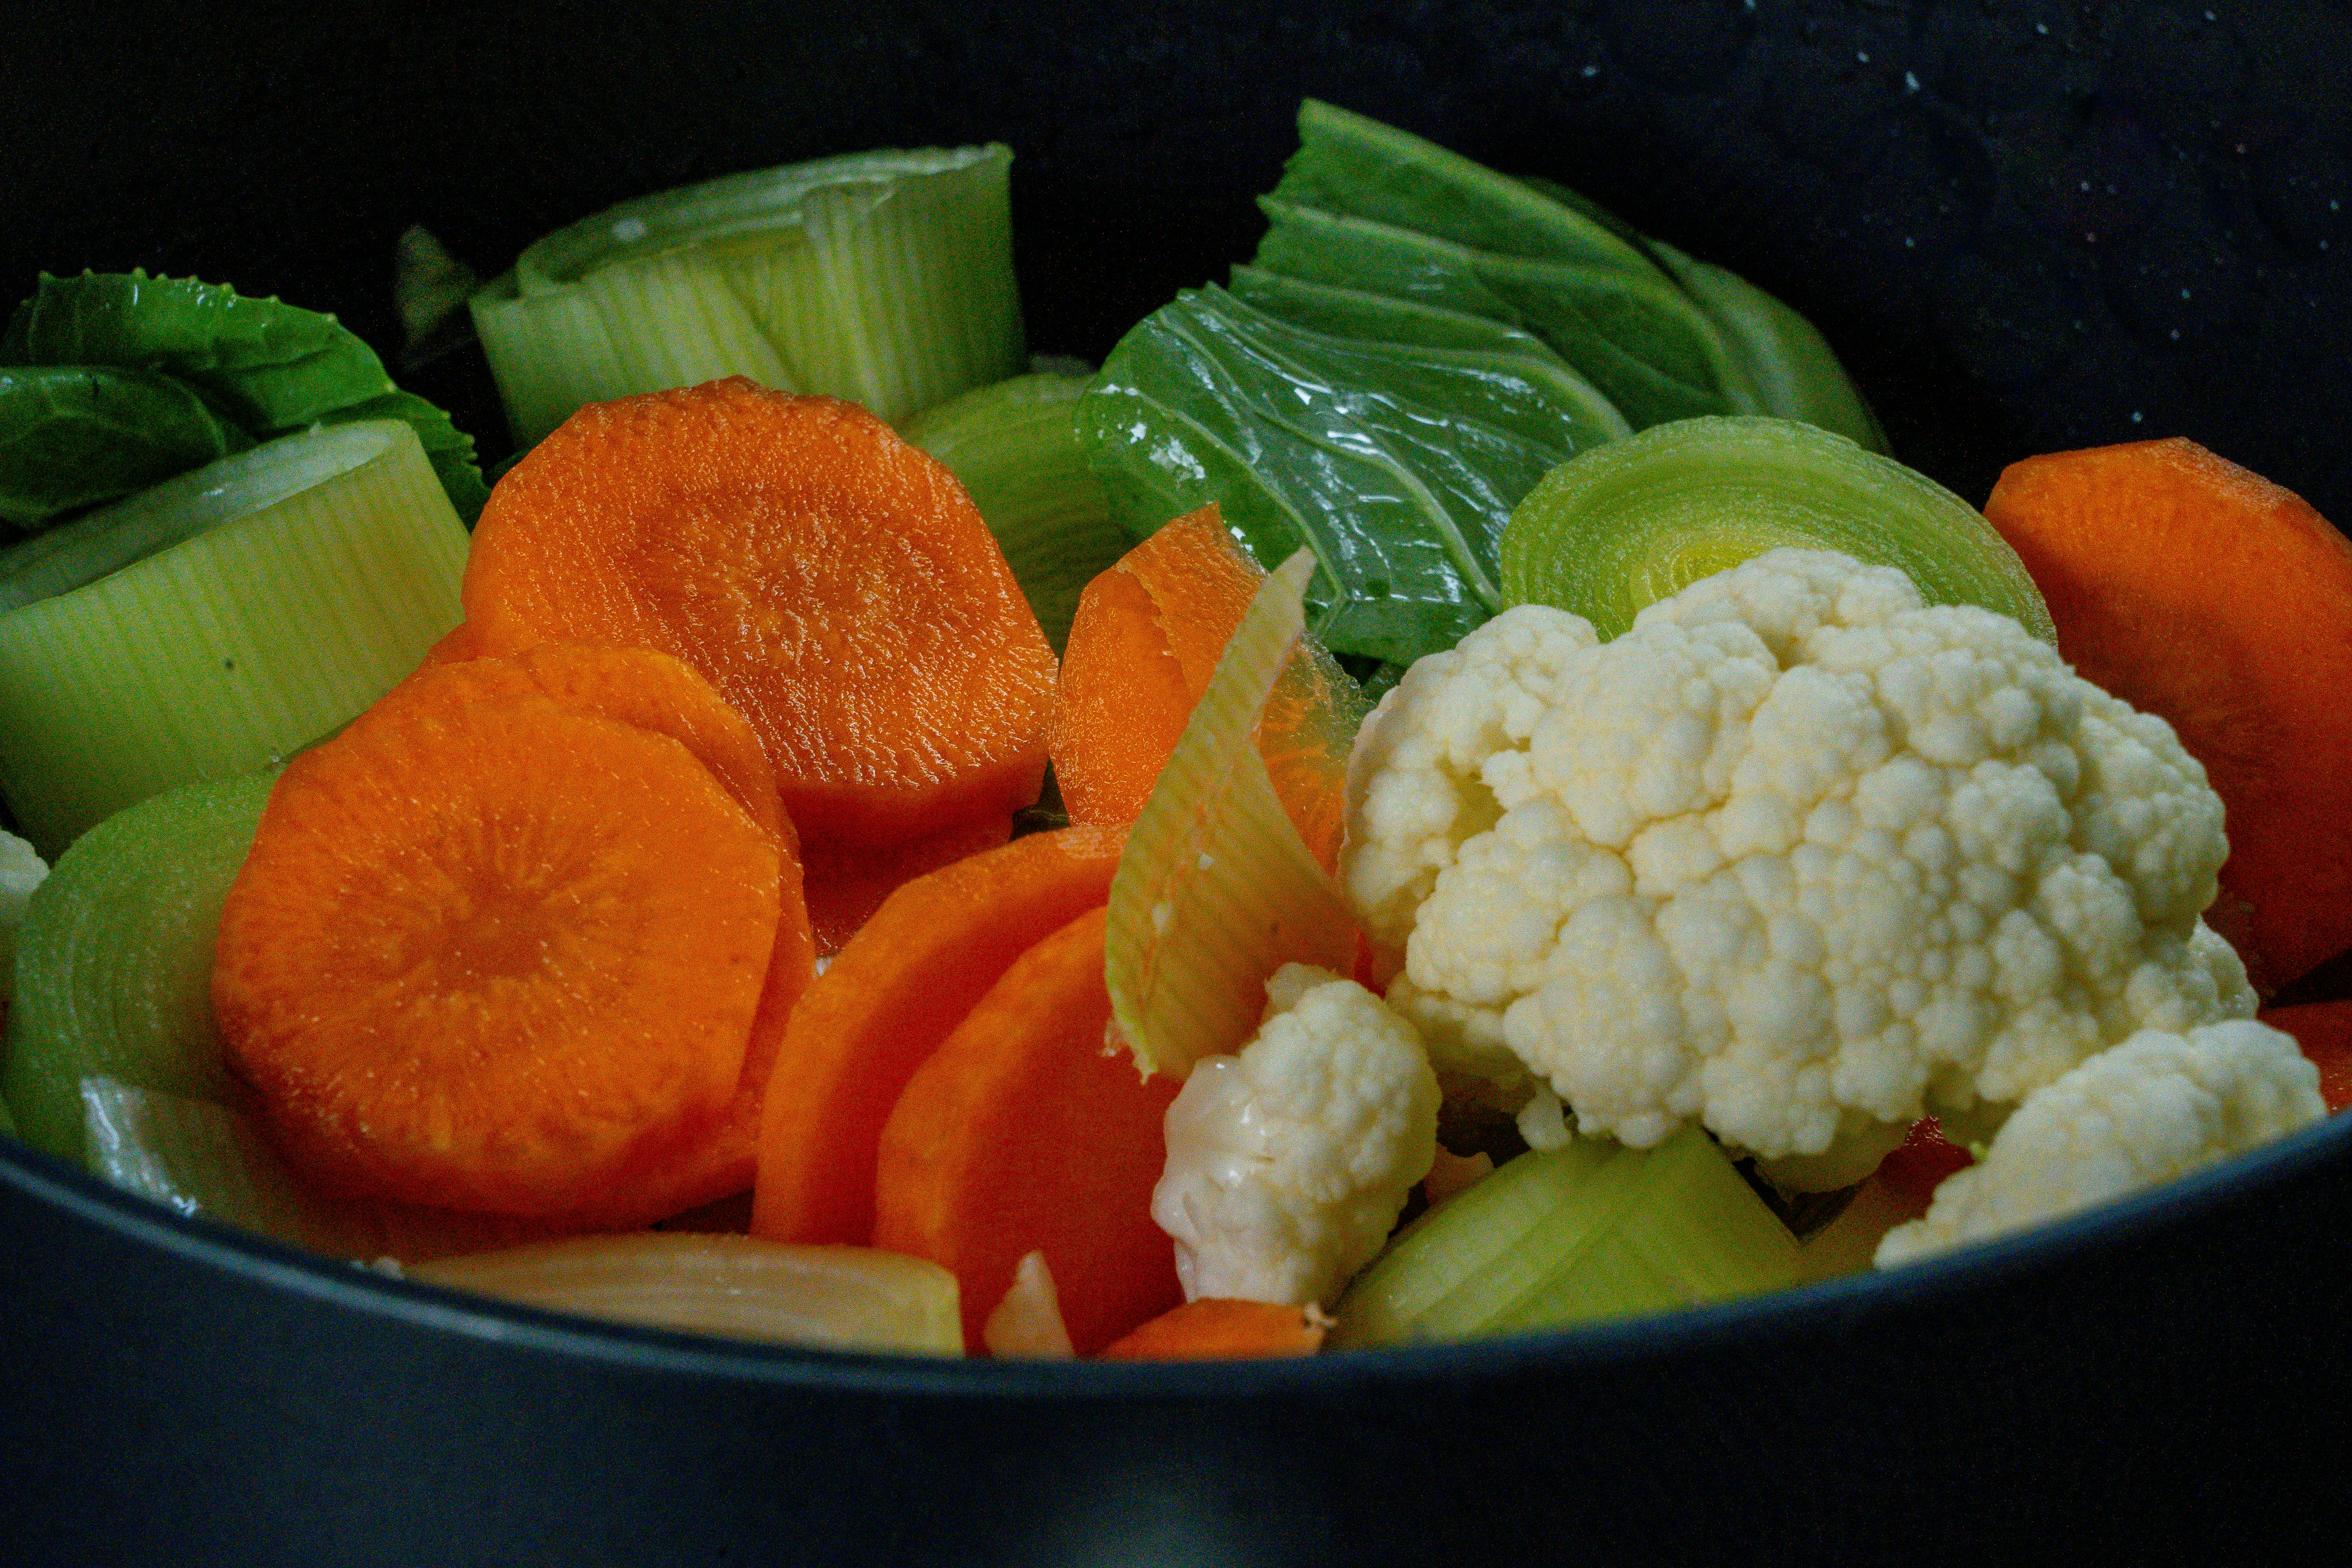 sliced carrots and green vegetable in black bowl